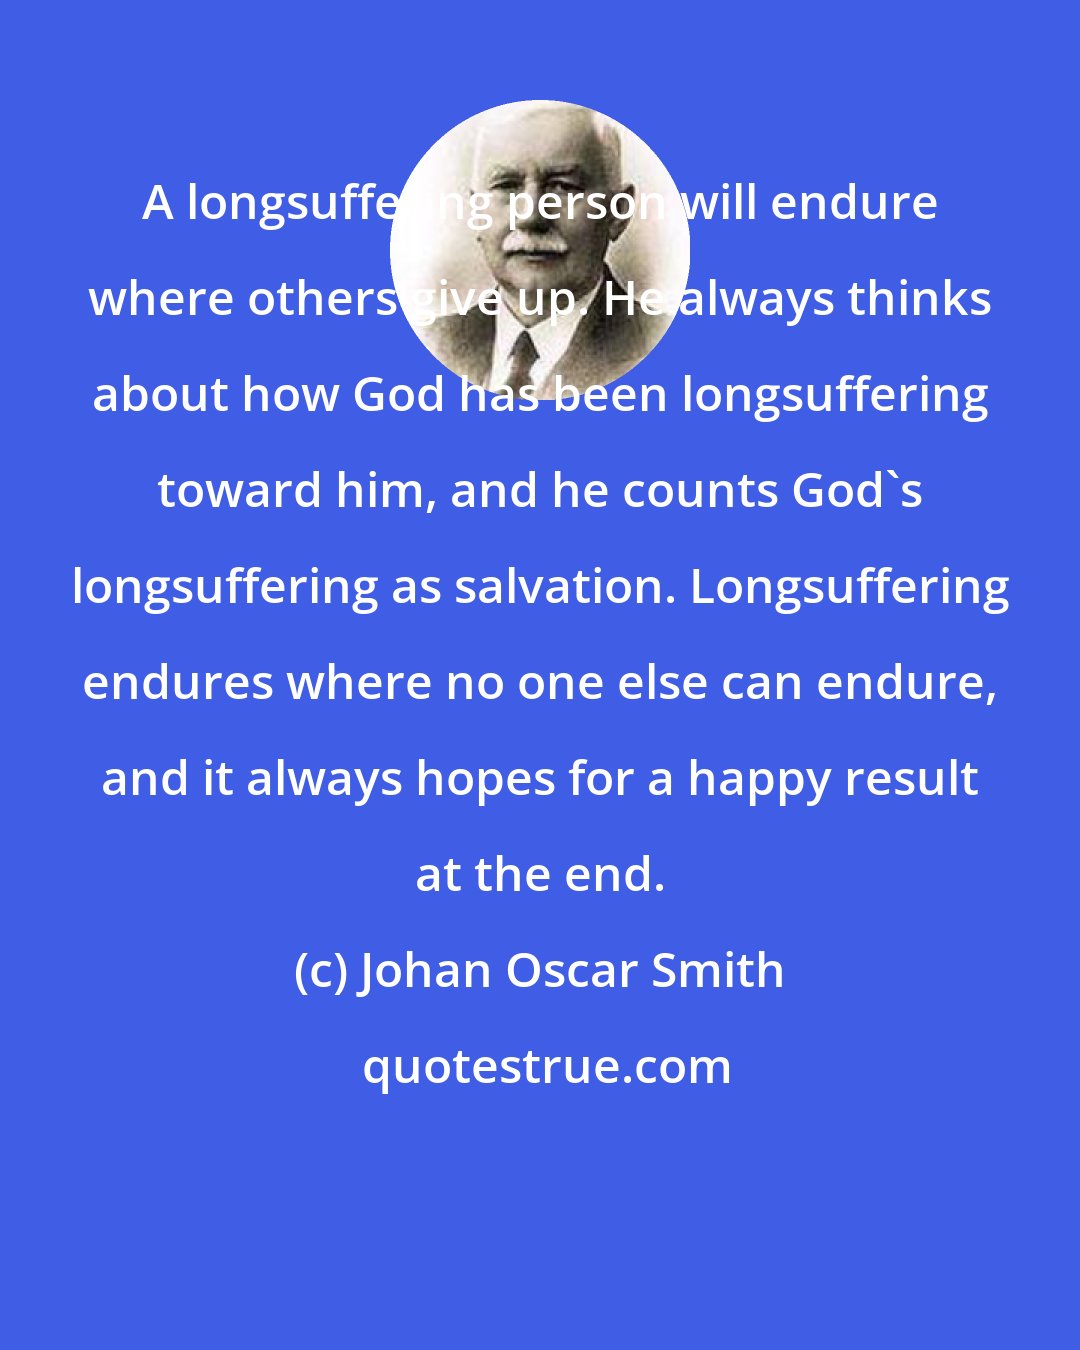 Johan Oscar Smith: A longsuffering person will endure where others give up. He always thinks about how God has been longsuffering toward him, and he counts God's longsuffering as salvation. Longsuffering endures where no one else can endure, and it always hopes for a happy result at the end.